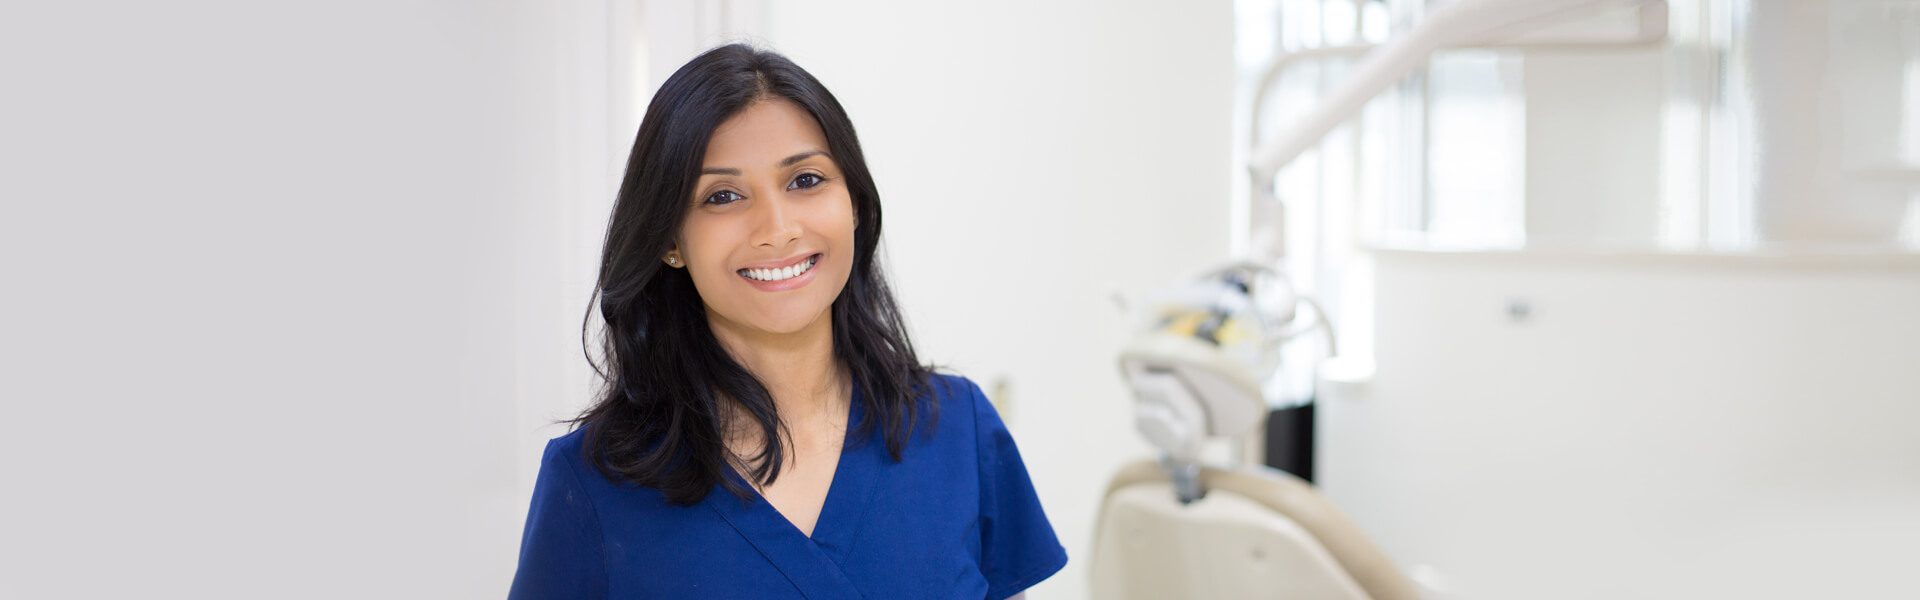 Dental Exams and Cleanings Crucial for Your Overall Health